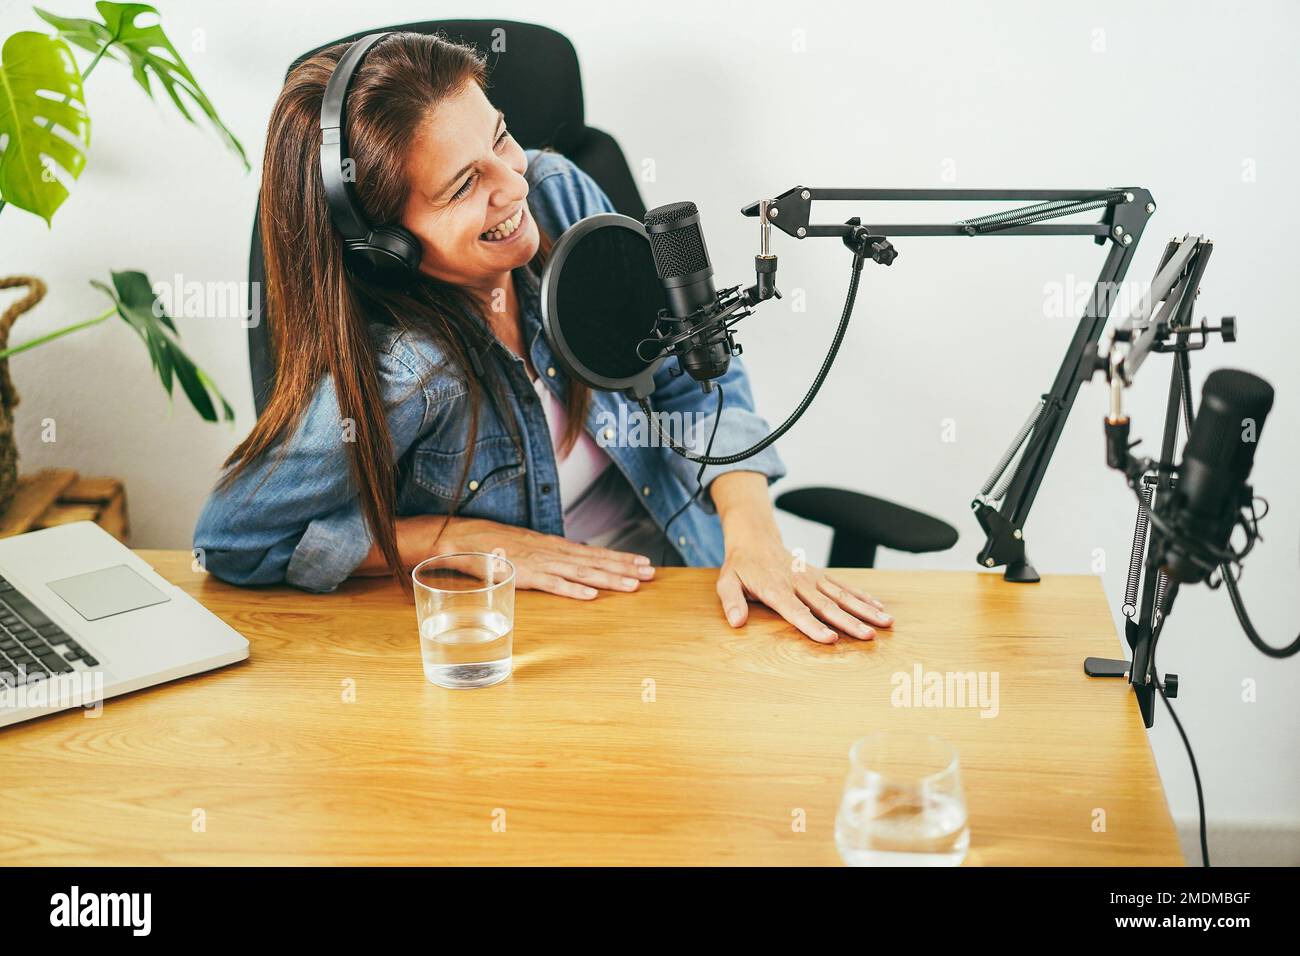 Hosts having podcast session together - Female speaker making an interview during live stream - Main focus on microphone Stock Photo